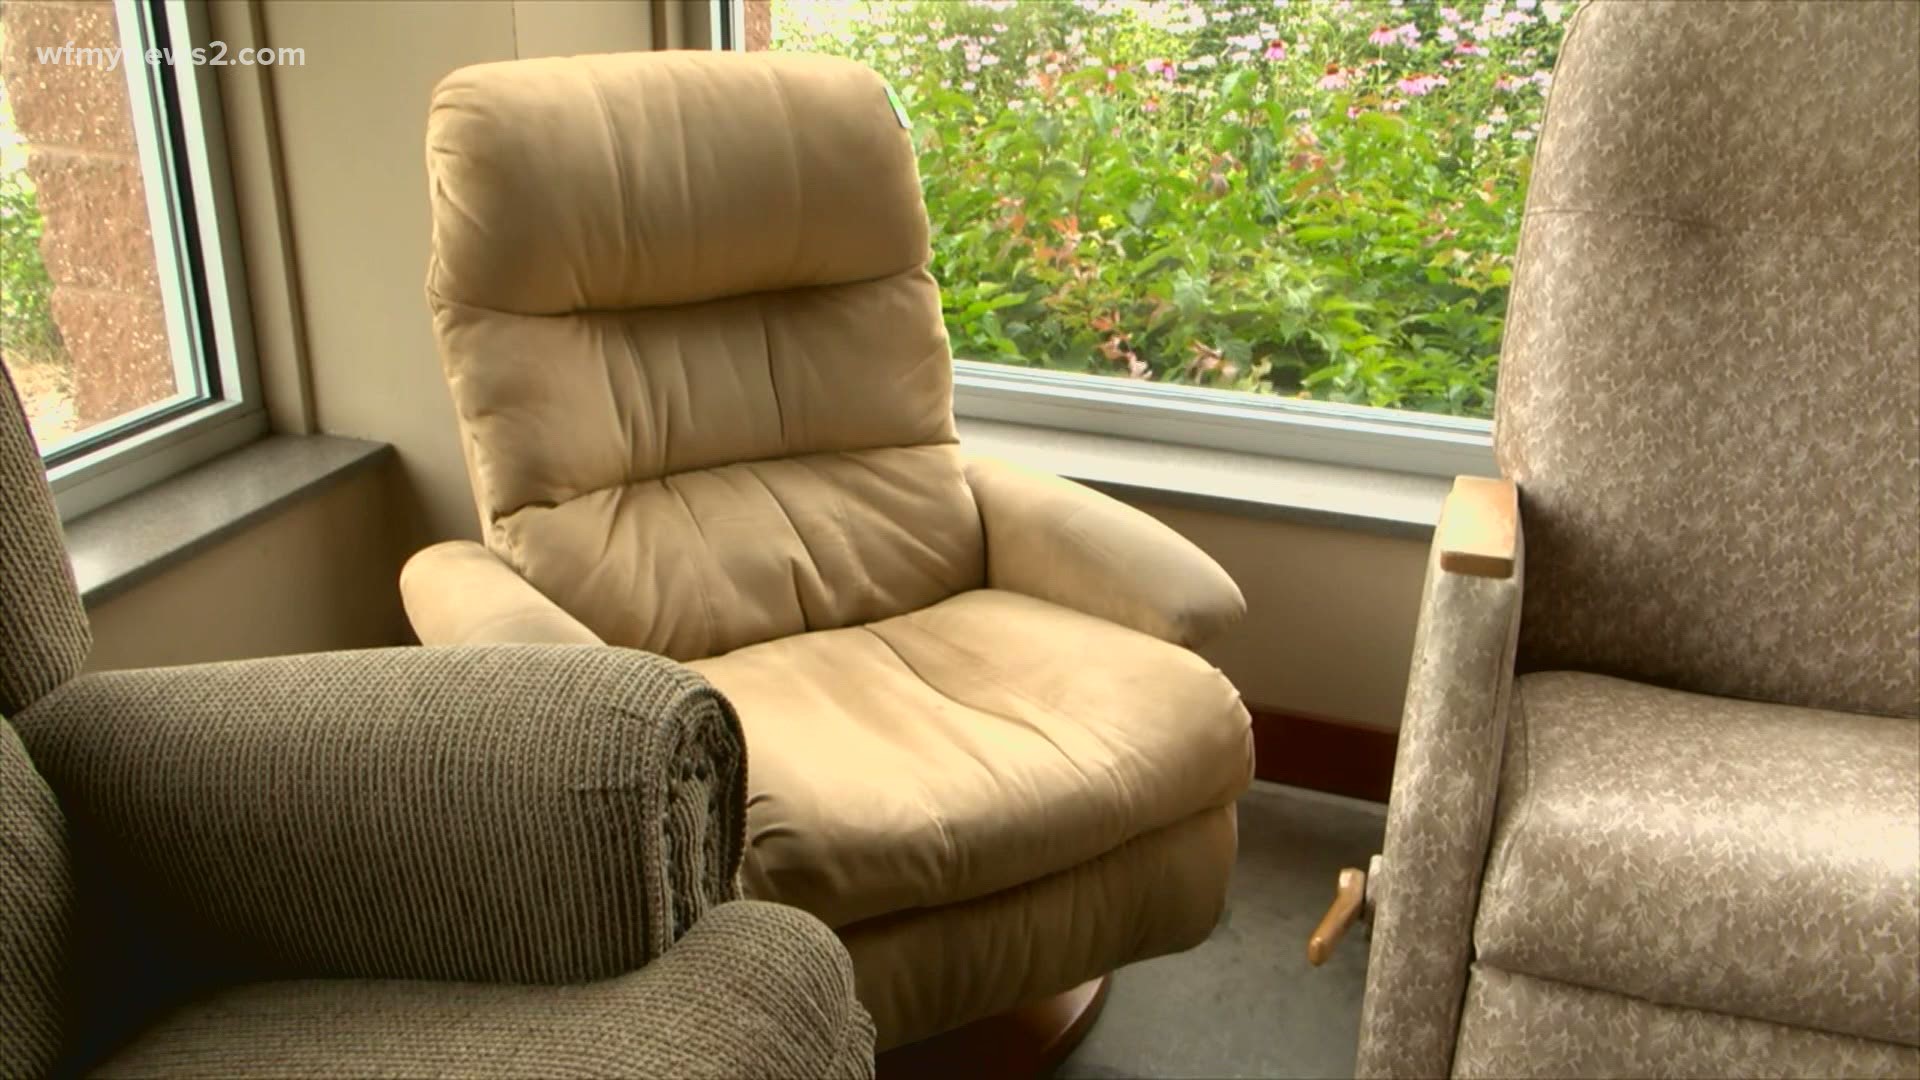 According to MarketWatch, more buyers are getting their furniture second hand instead of buying new.